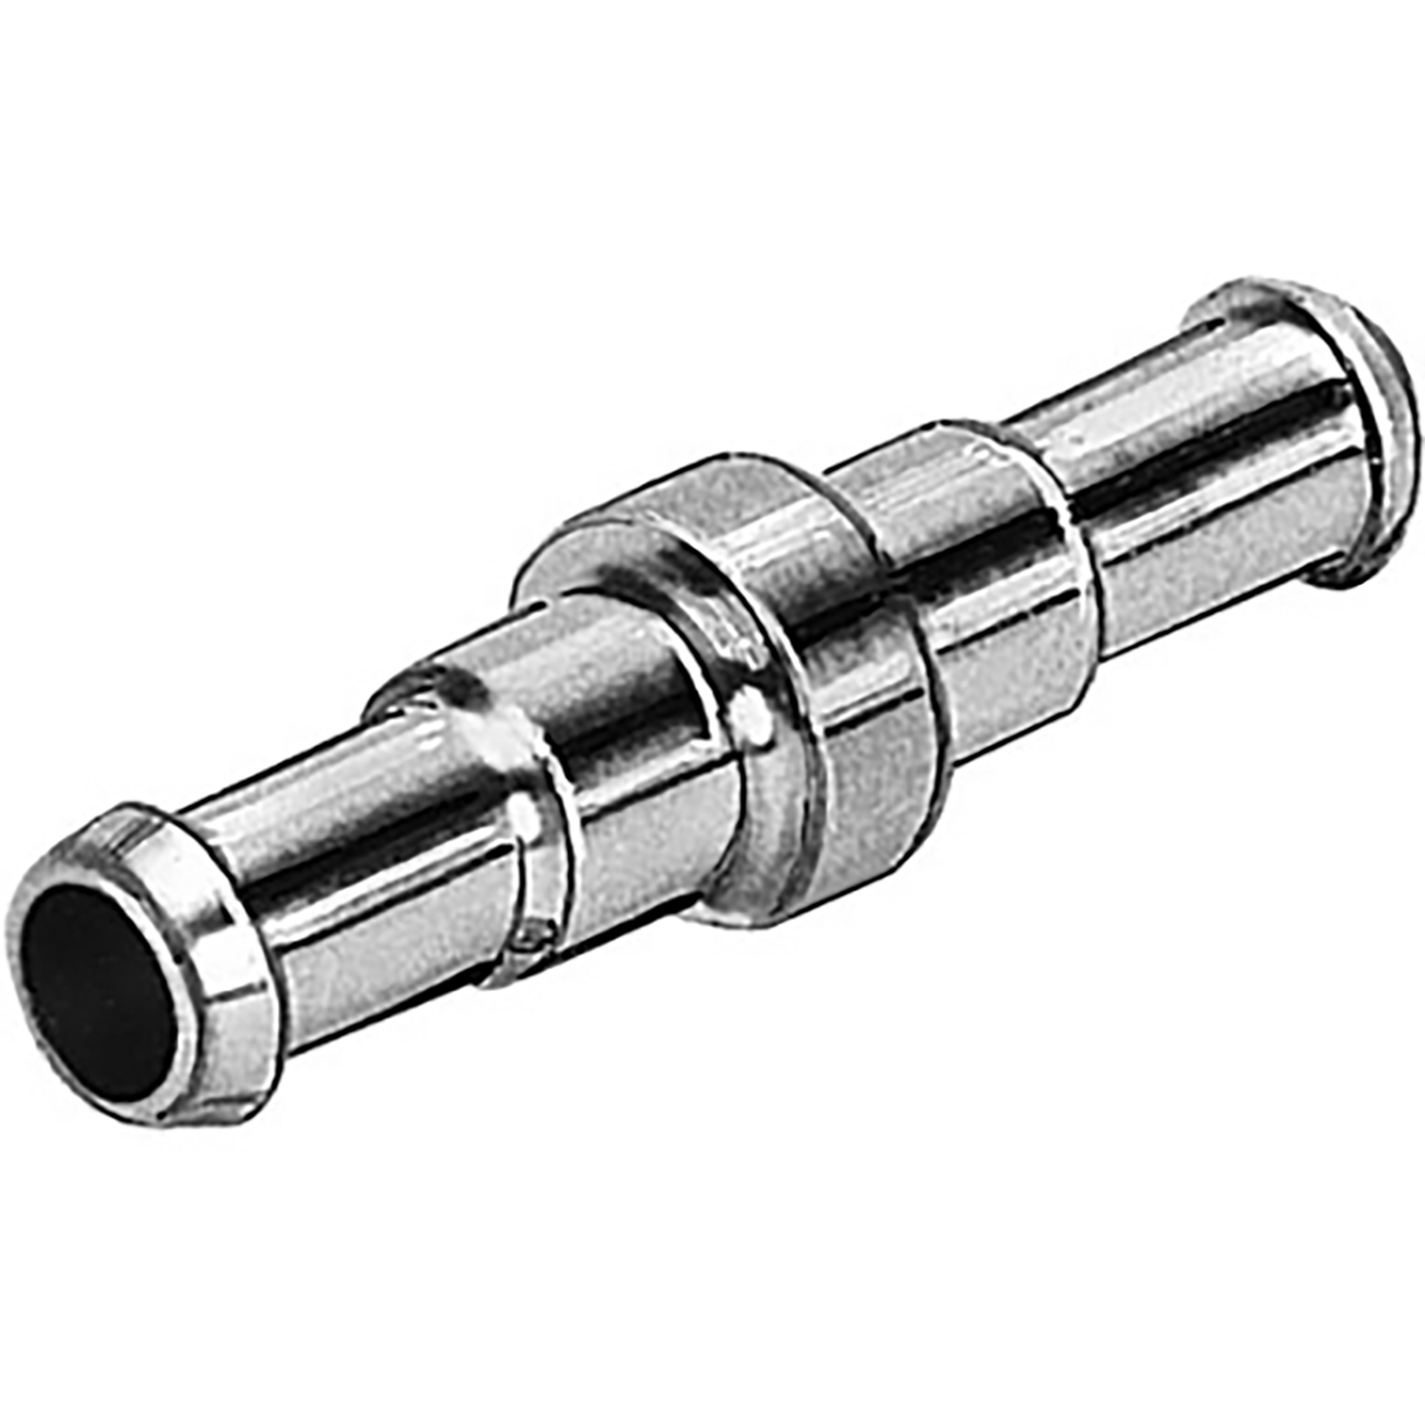 RTU-PK-2/2-B BARBED TUBING CONNECTOR sold in multiples of 10 only